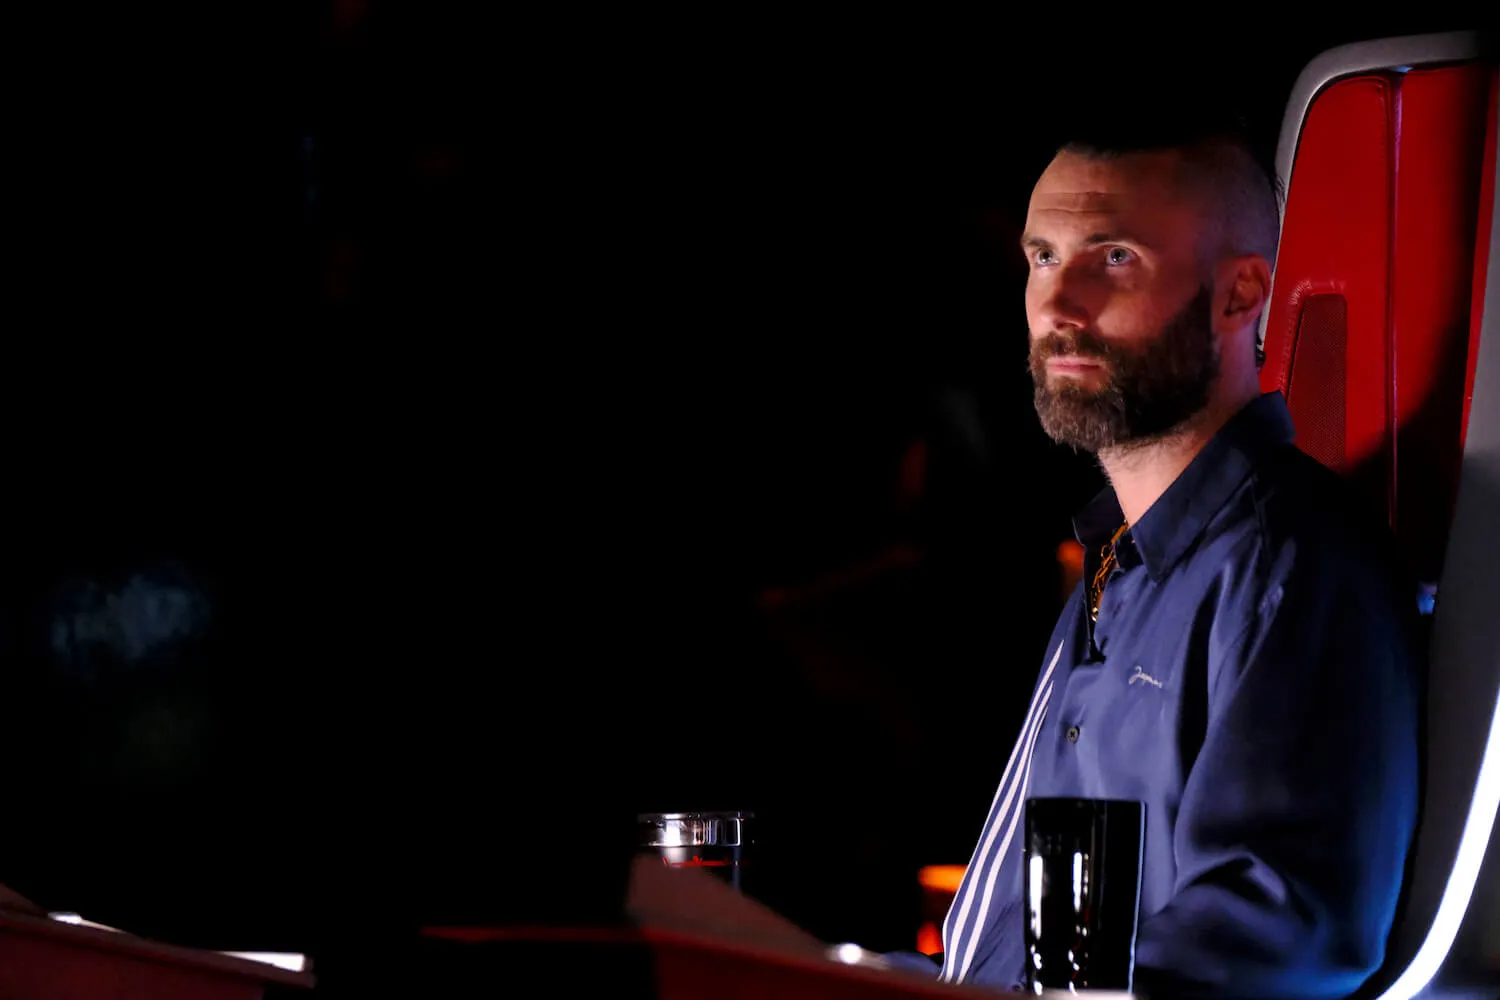 Adam Levine sitting in a red chair in 'The Voice' Season 16